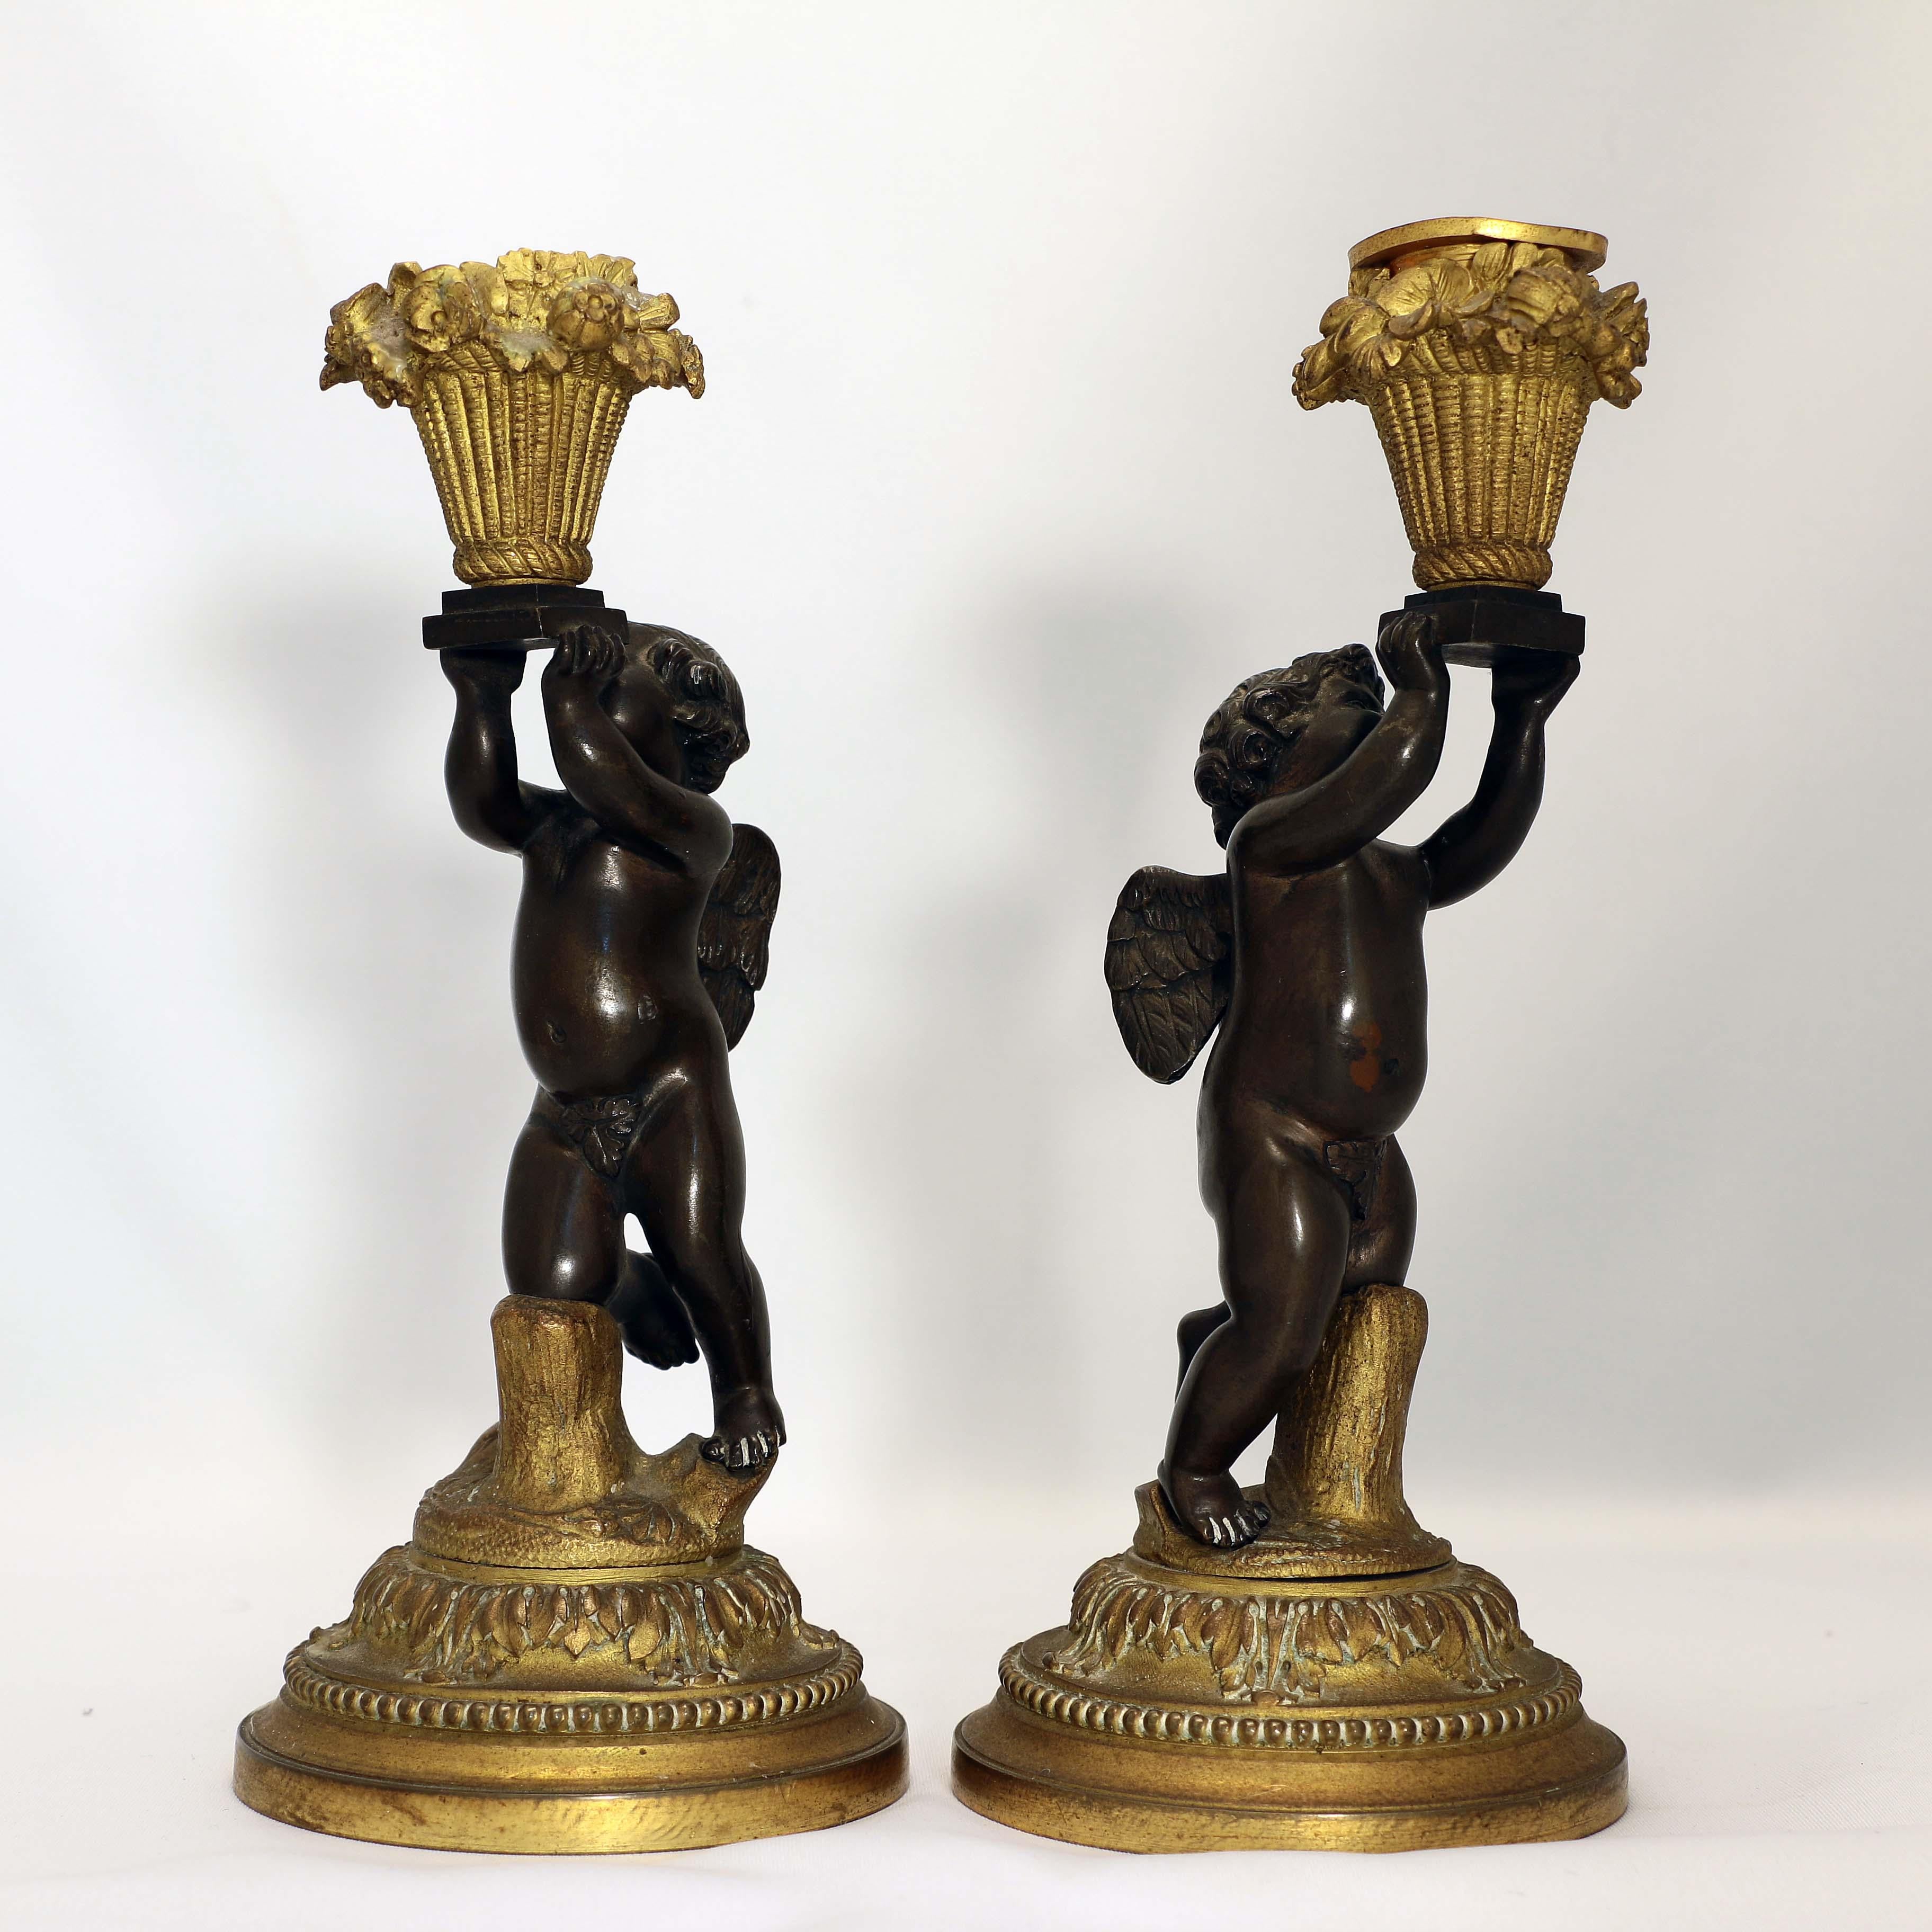 This charming pair speak of service, love and the bounty of the earth. Each cherub, on one knee, holds aloft a brimming panier with fruit and flowers, each is raised on a beaded circular foot.